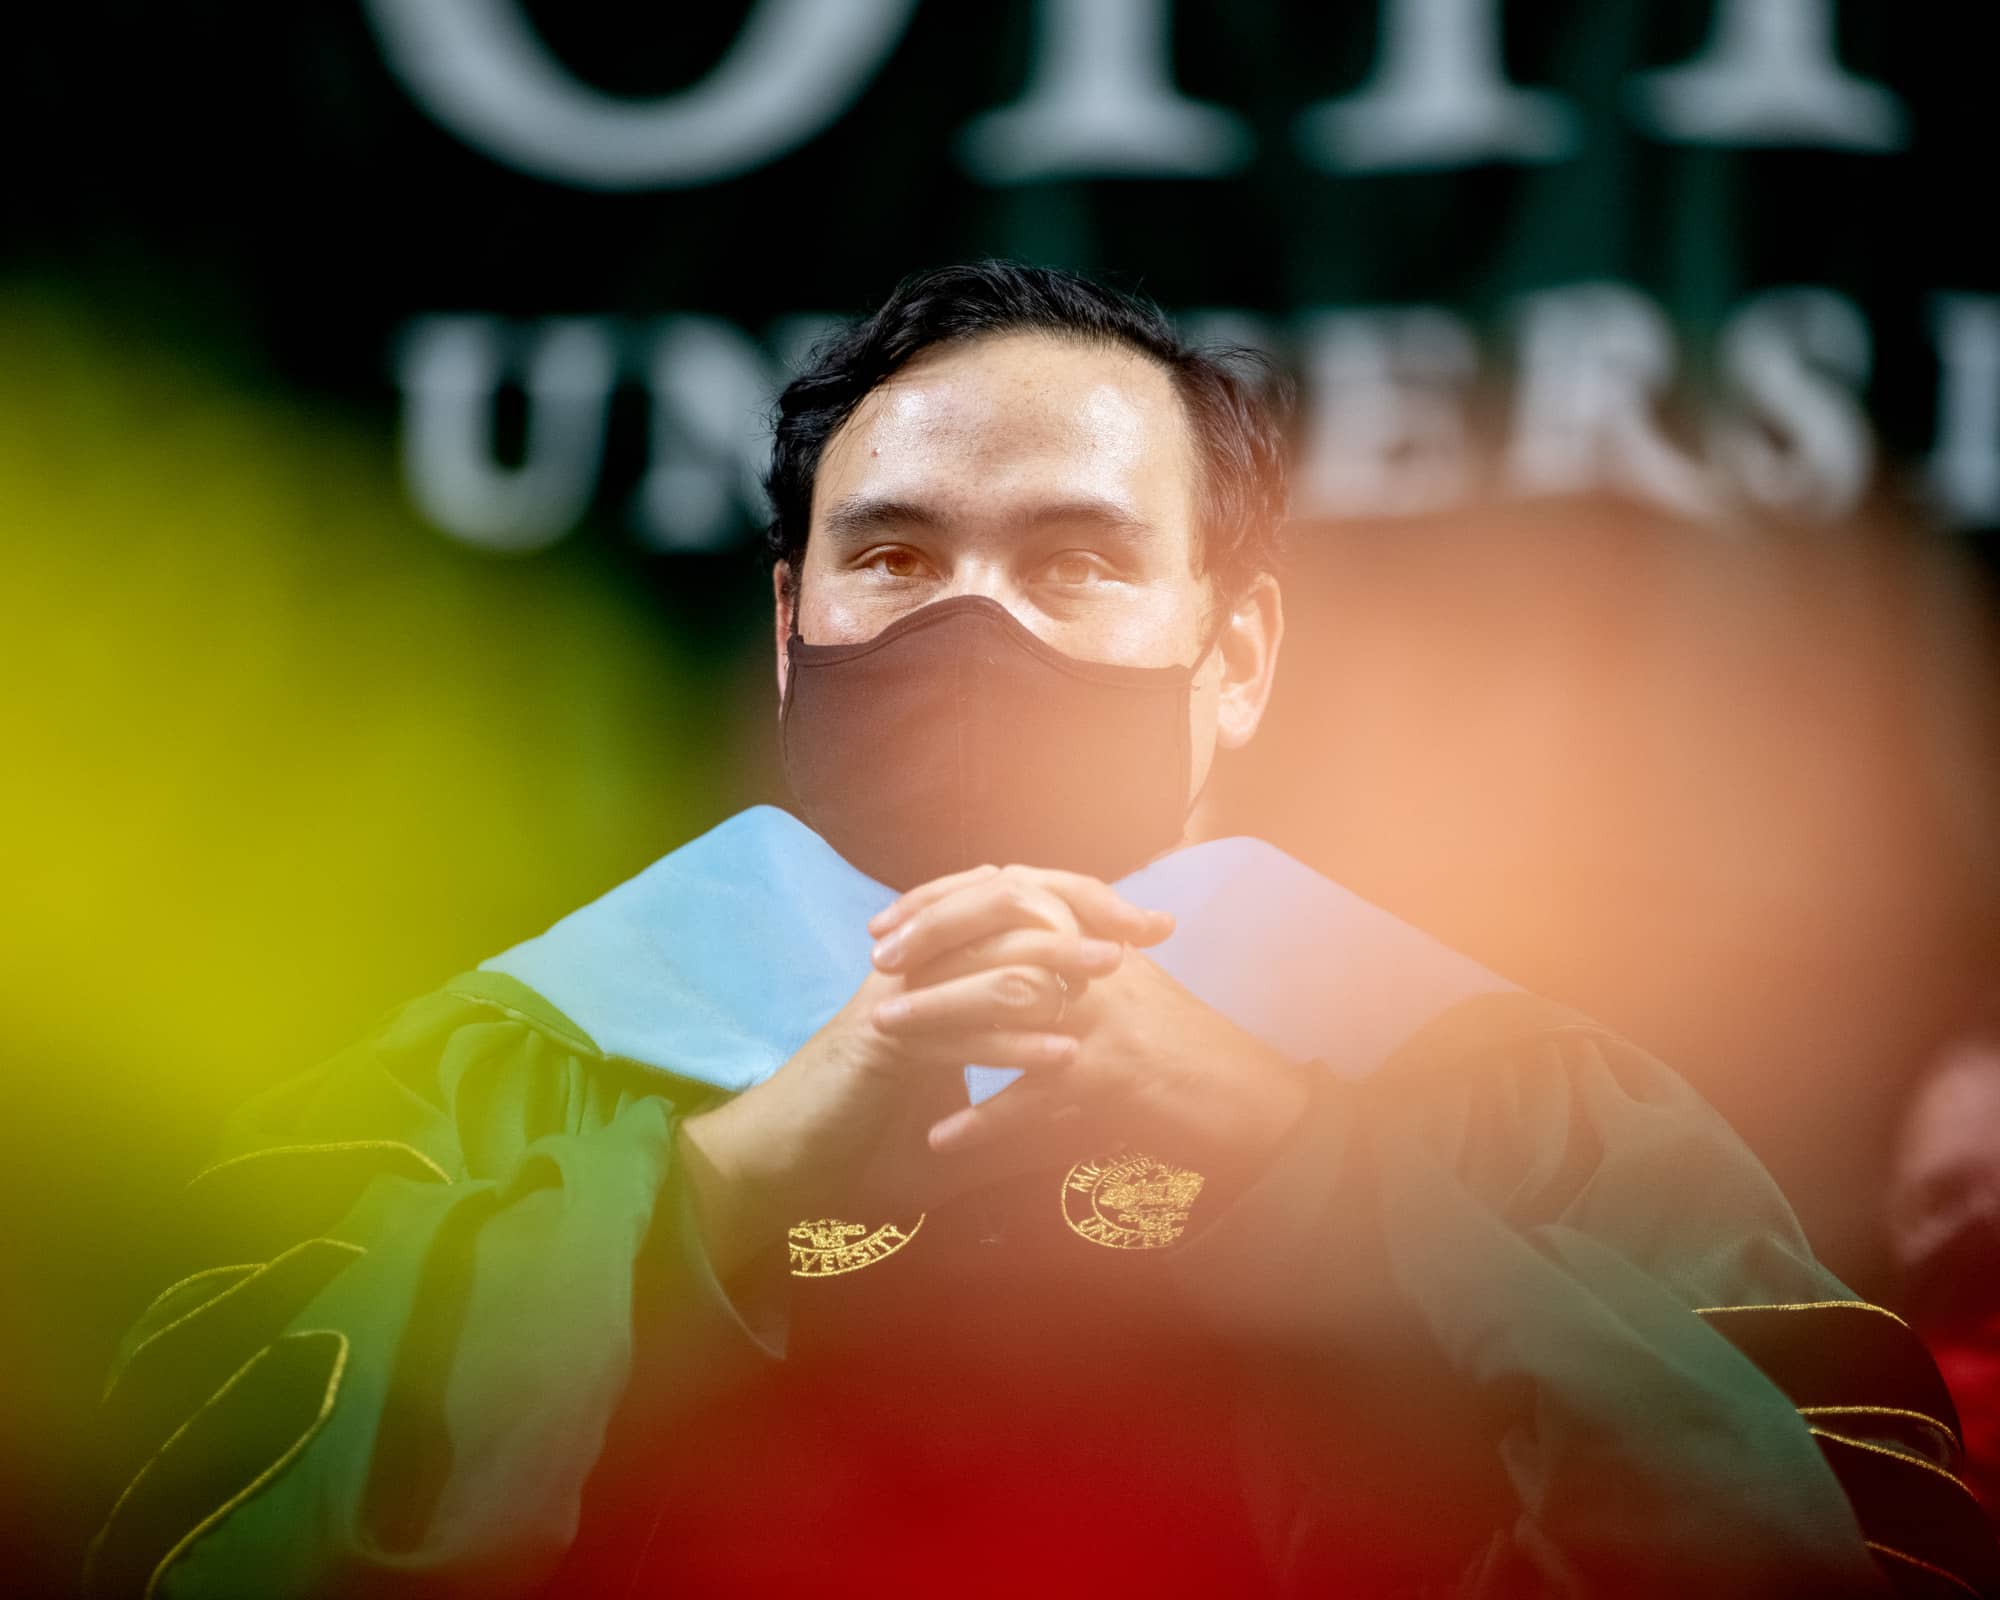 Ohio University Associate Professor David Nguyen waits to delivers the keynote address at Fall 2021 Commencement.